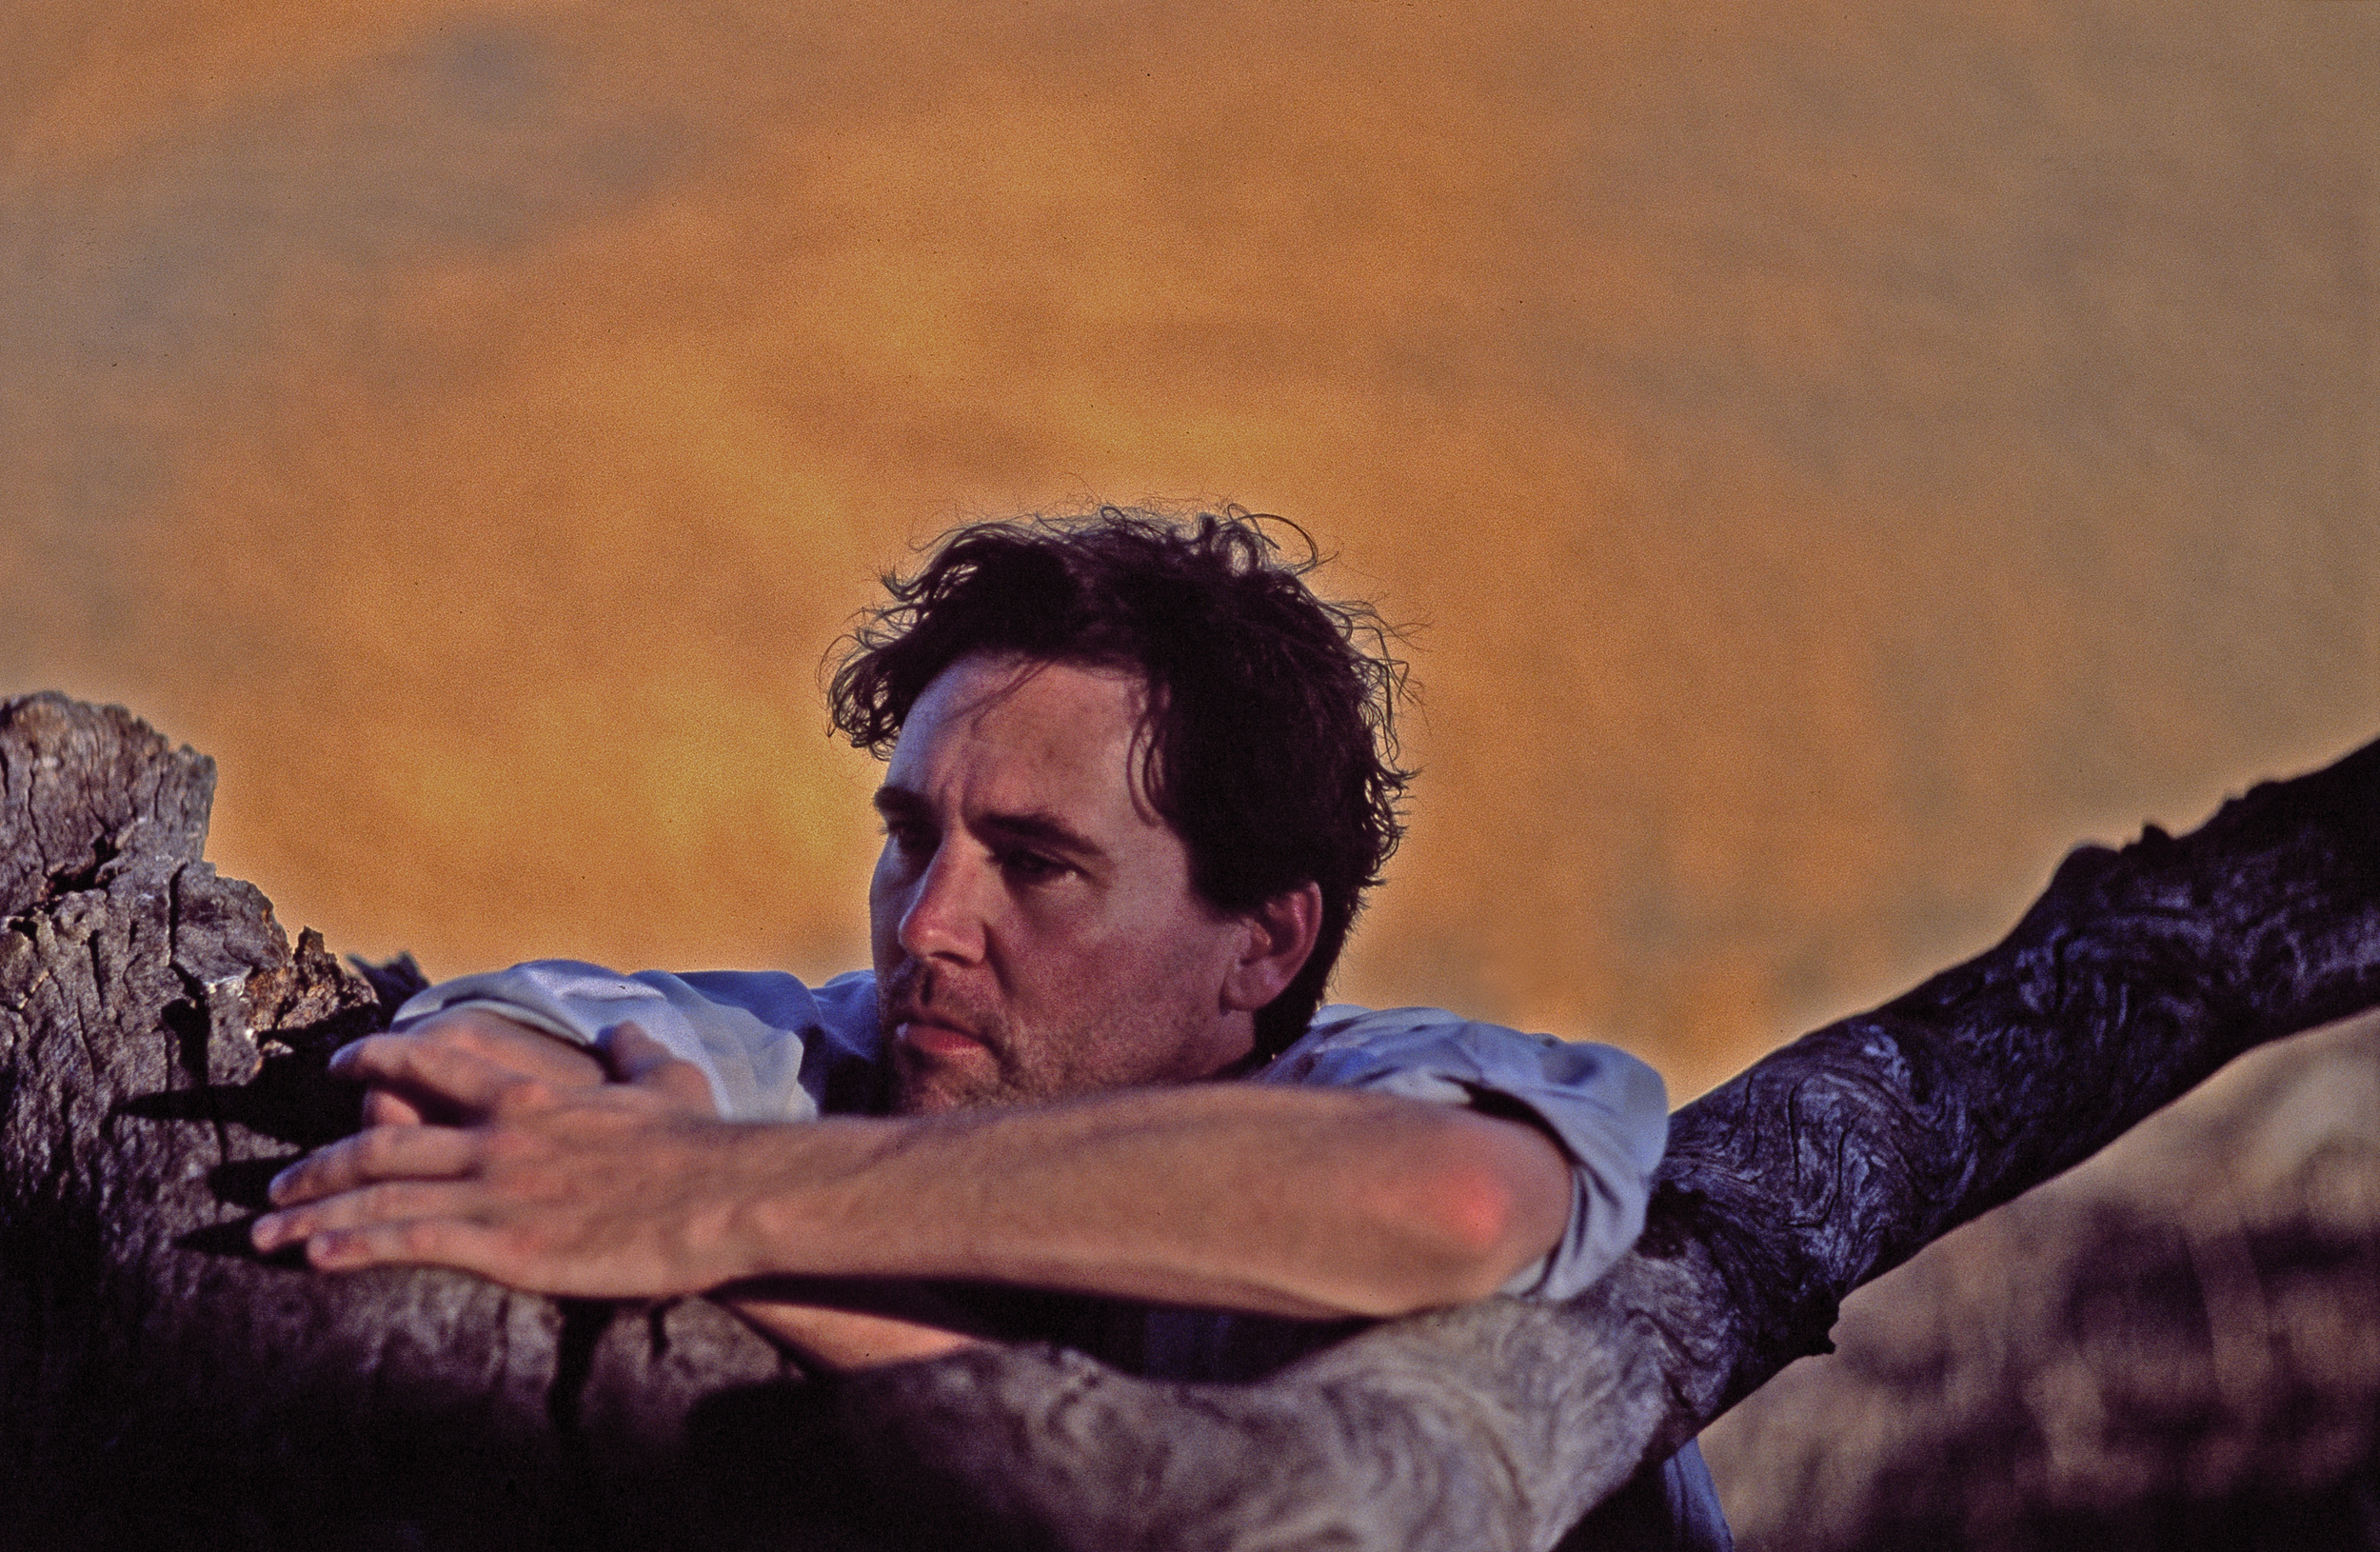    The Washington Post: For Cass McCombs, the truth is blowing in the apocalyptic breeze   